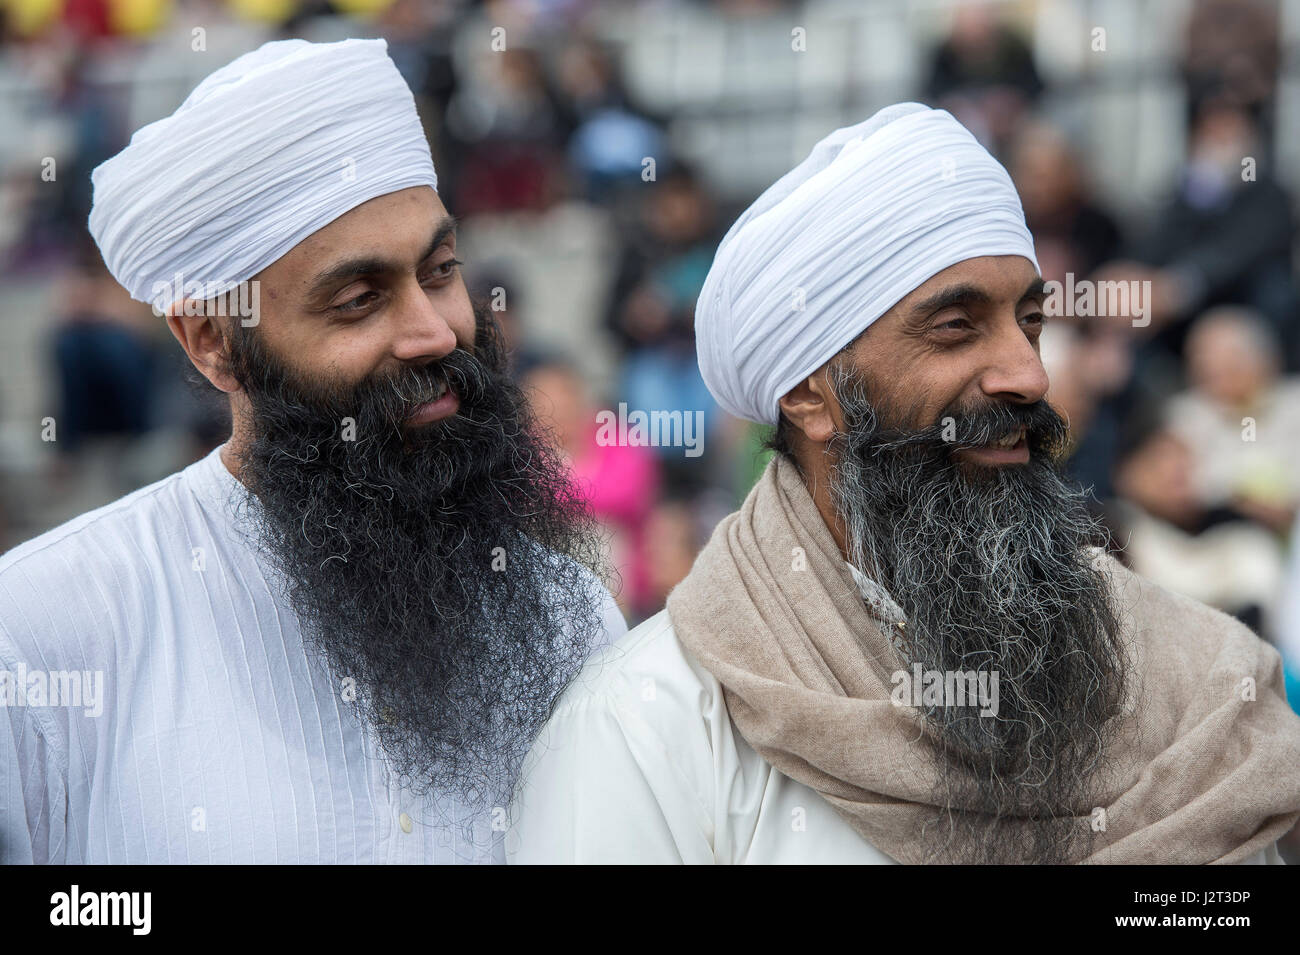 People attend the Vaisakhi Festival 2017 in Trafalgar Square, central London, to mark the Sikh New Year, the holiest day of the calendar for over 20 million Sikhs worldwide. Stock Photo